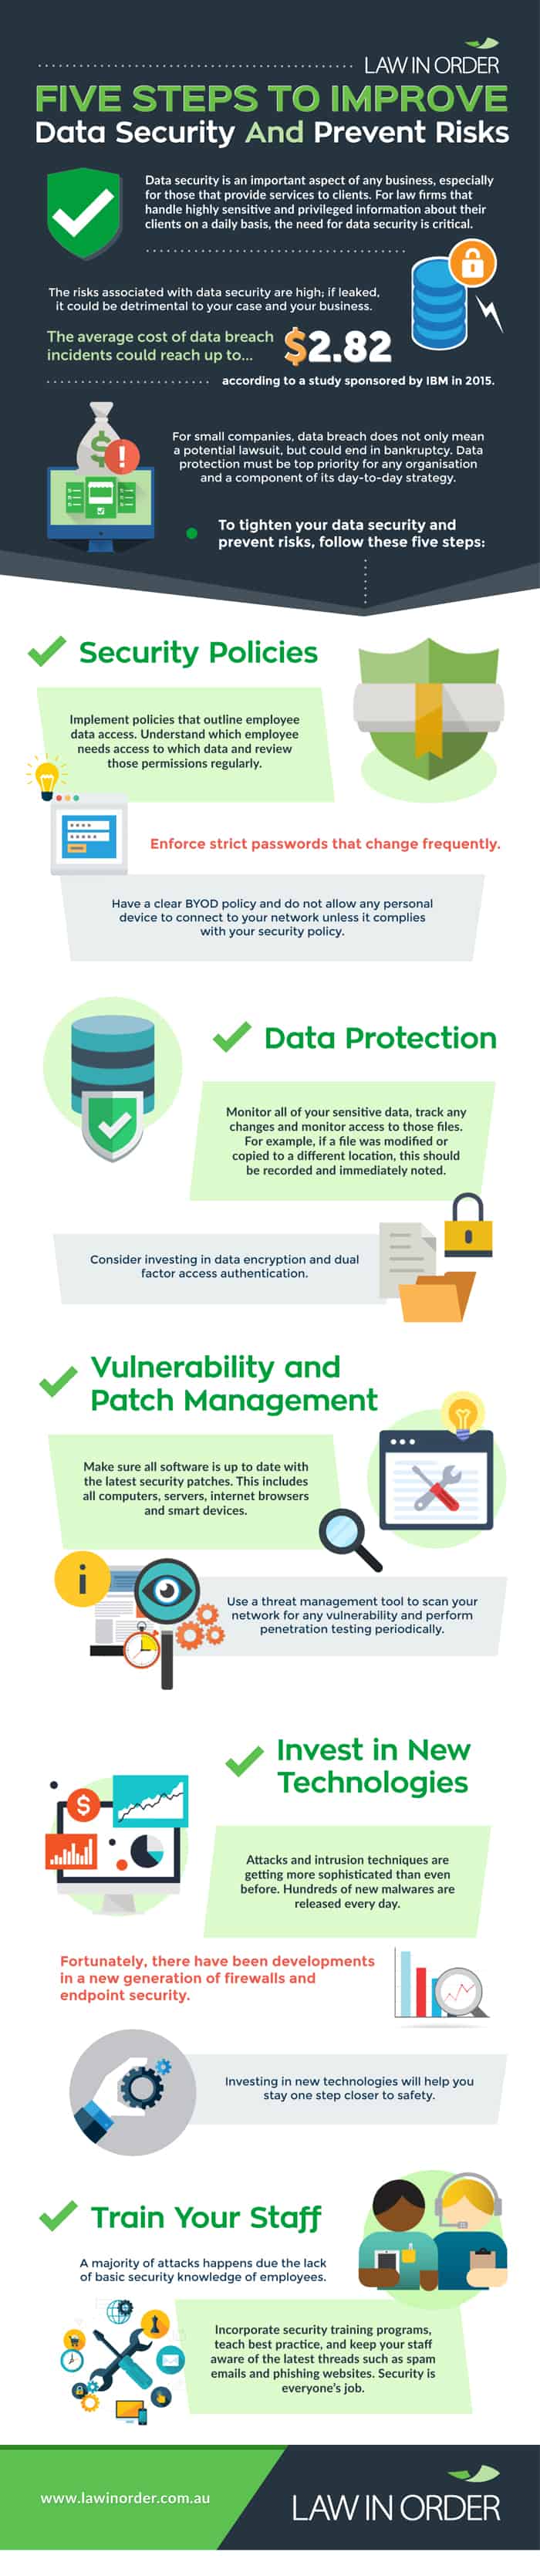 five-steps-to-improve-data-security-and-prevent-risks-jpg